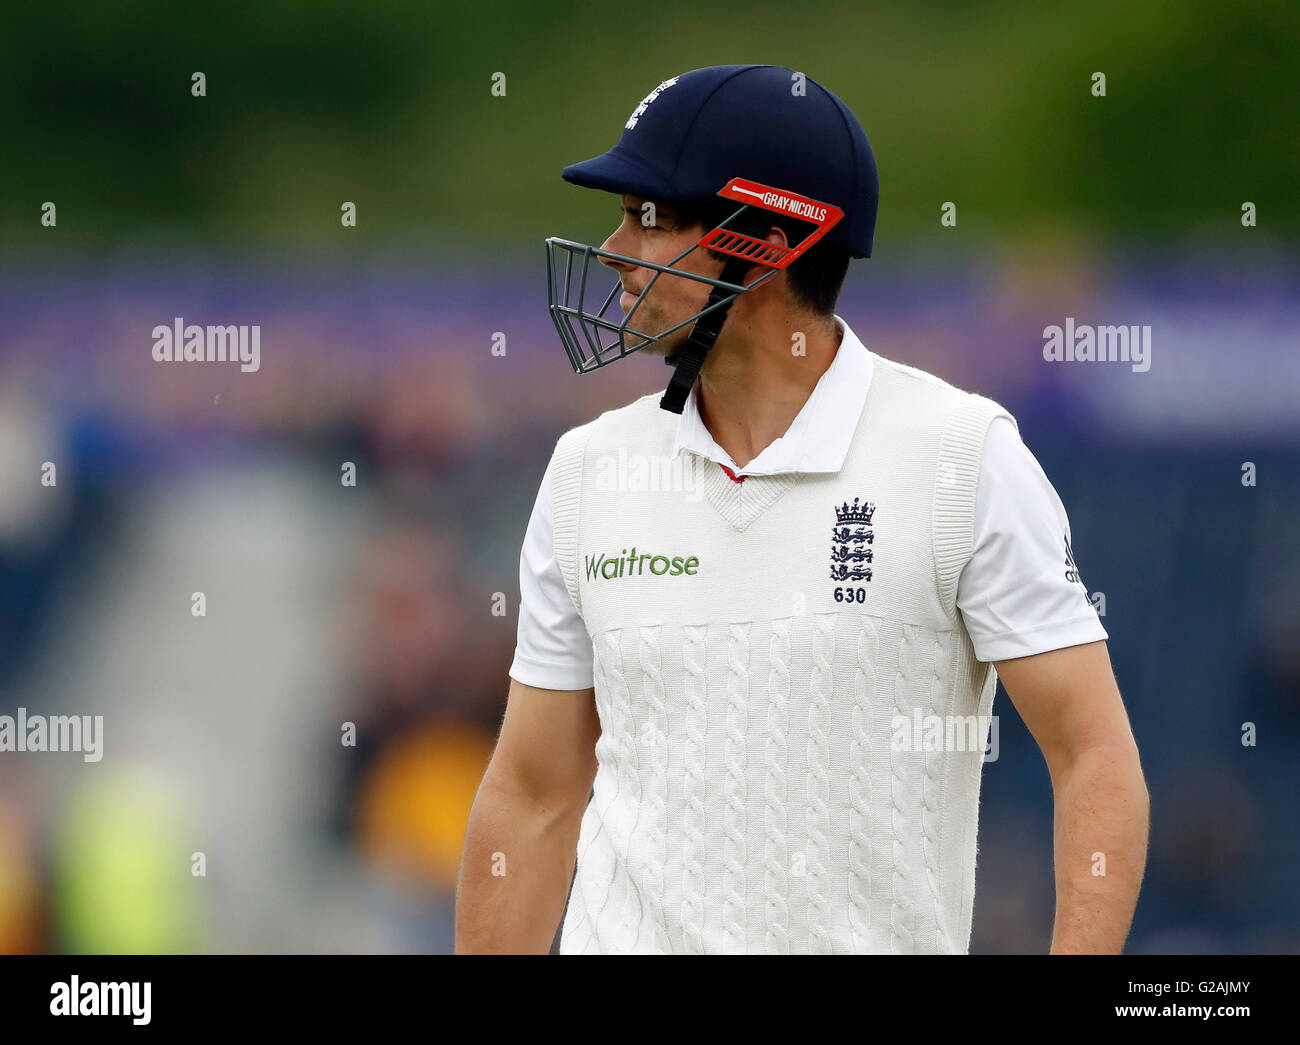 England's Alastair Cook walks off after being caught out for15 runs needing only 20 to beat the 10,000 run record during day one of the Investec Second Test Match at the Emirates Riverside, Chester-Le-Street. Stock Photo